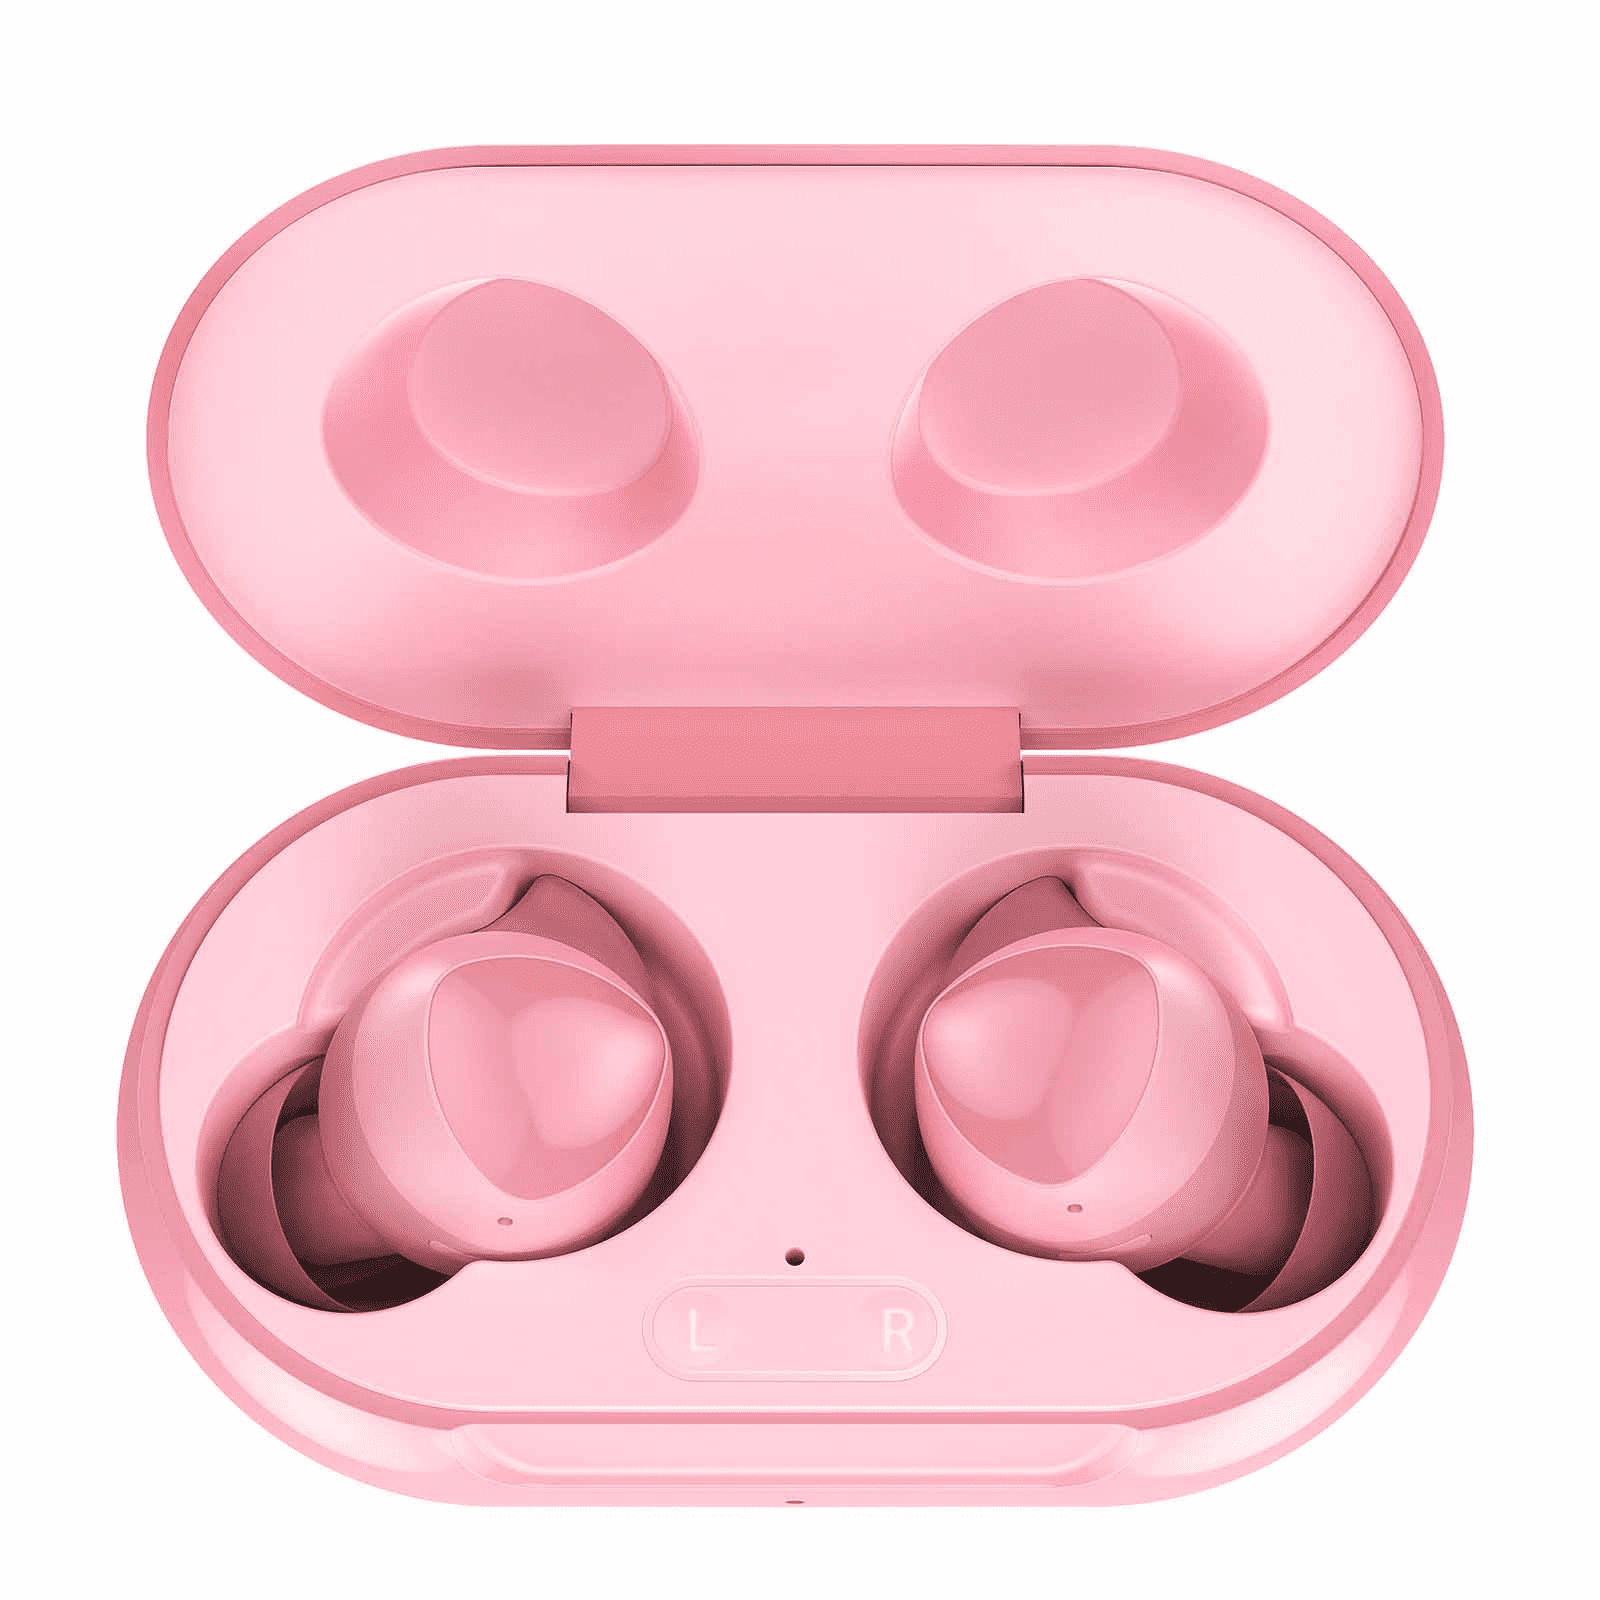 Street Buds Plus True Wireless Earbuds For Huawei P9 Plus With Active Noise (Charging Case Included) Pink - Walmart.com